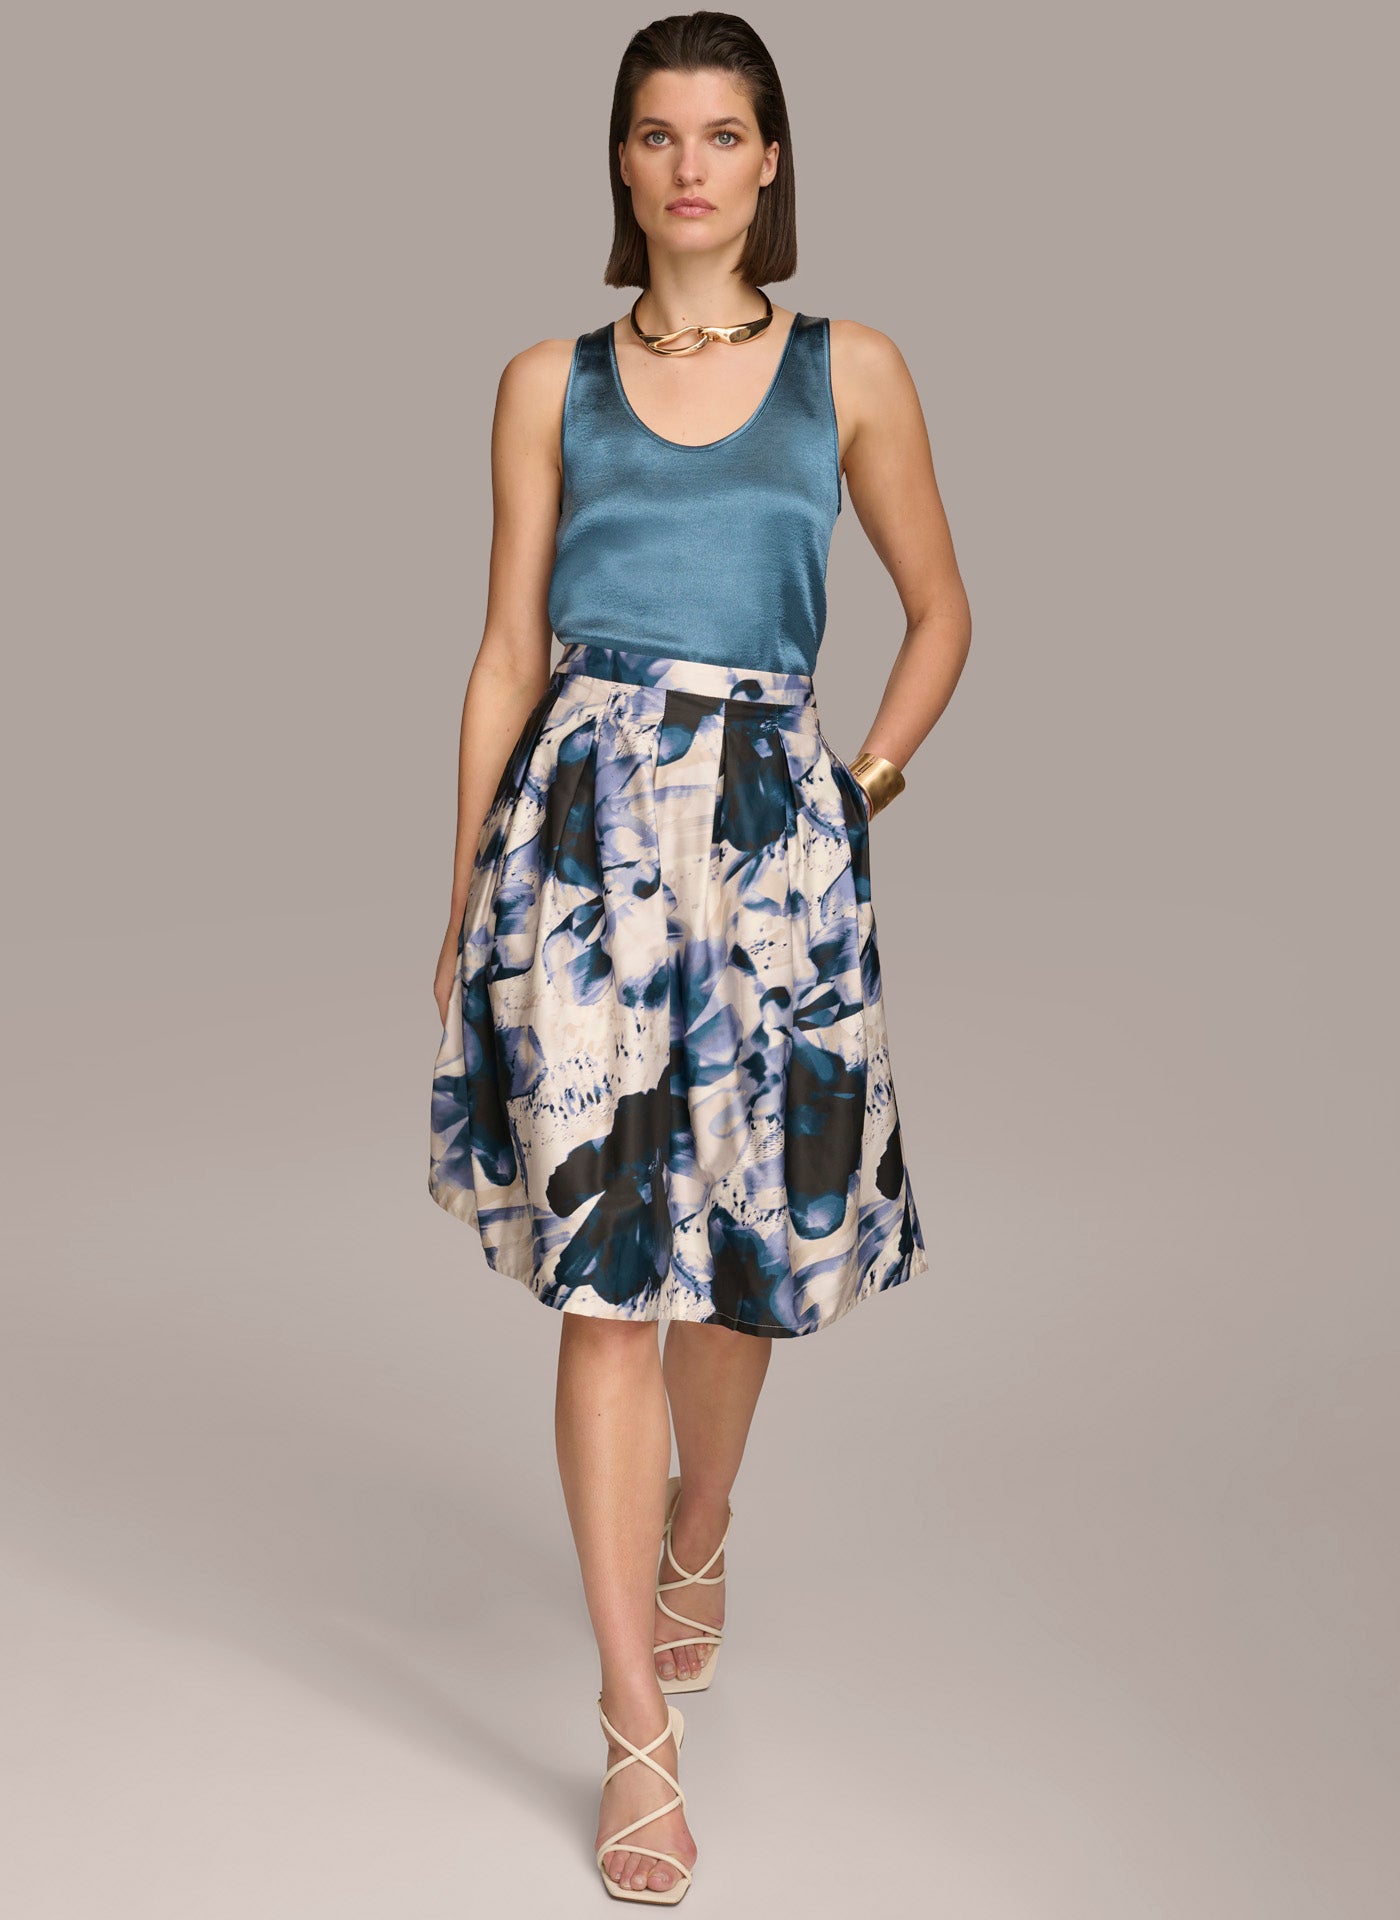 PRINTED SKIRT WITH PLEATS